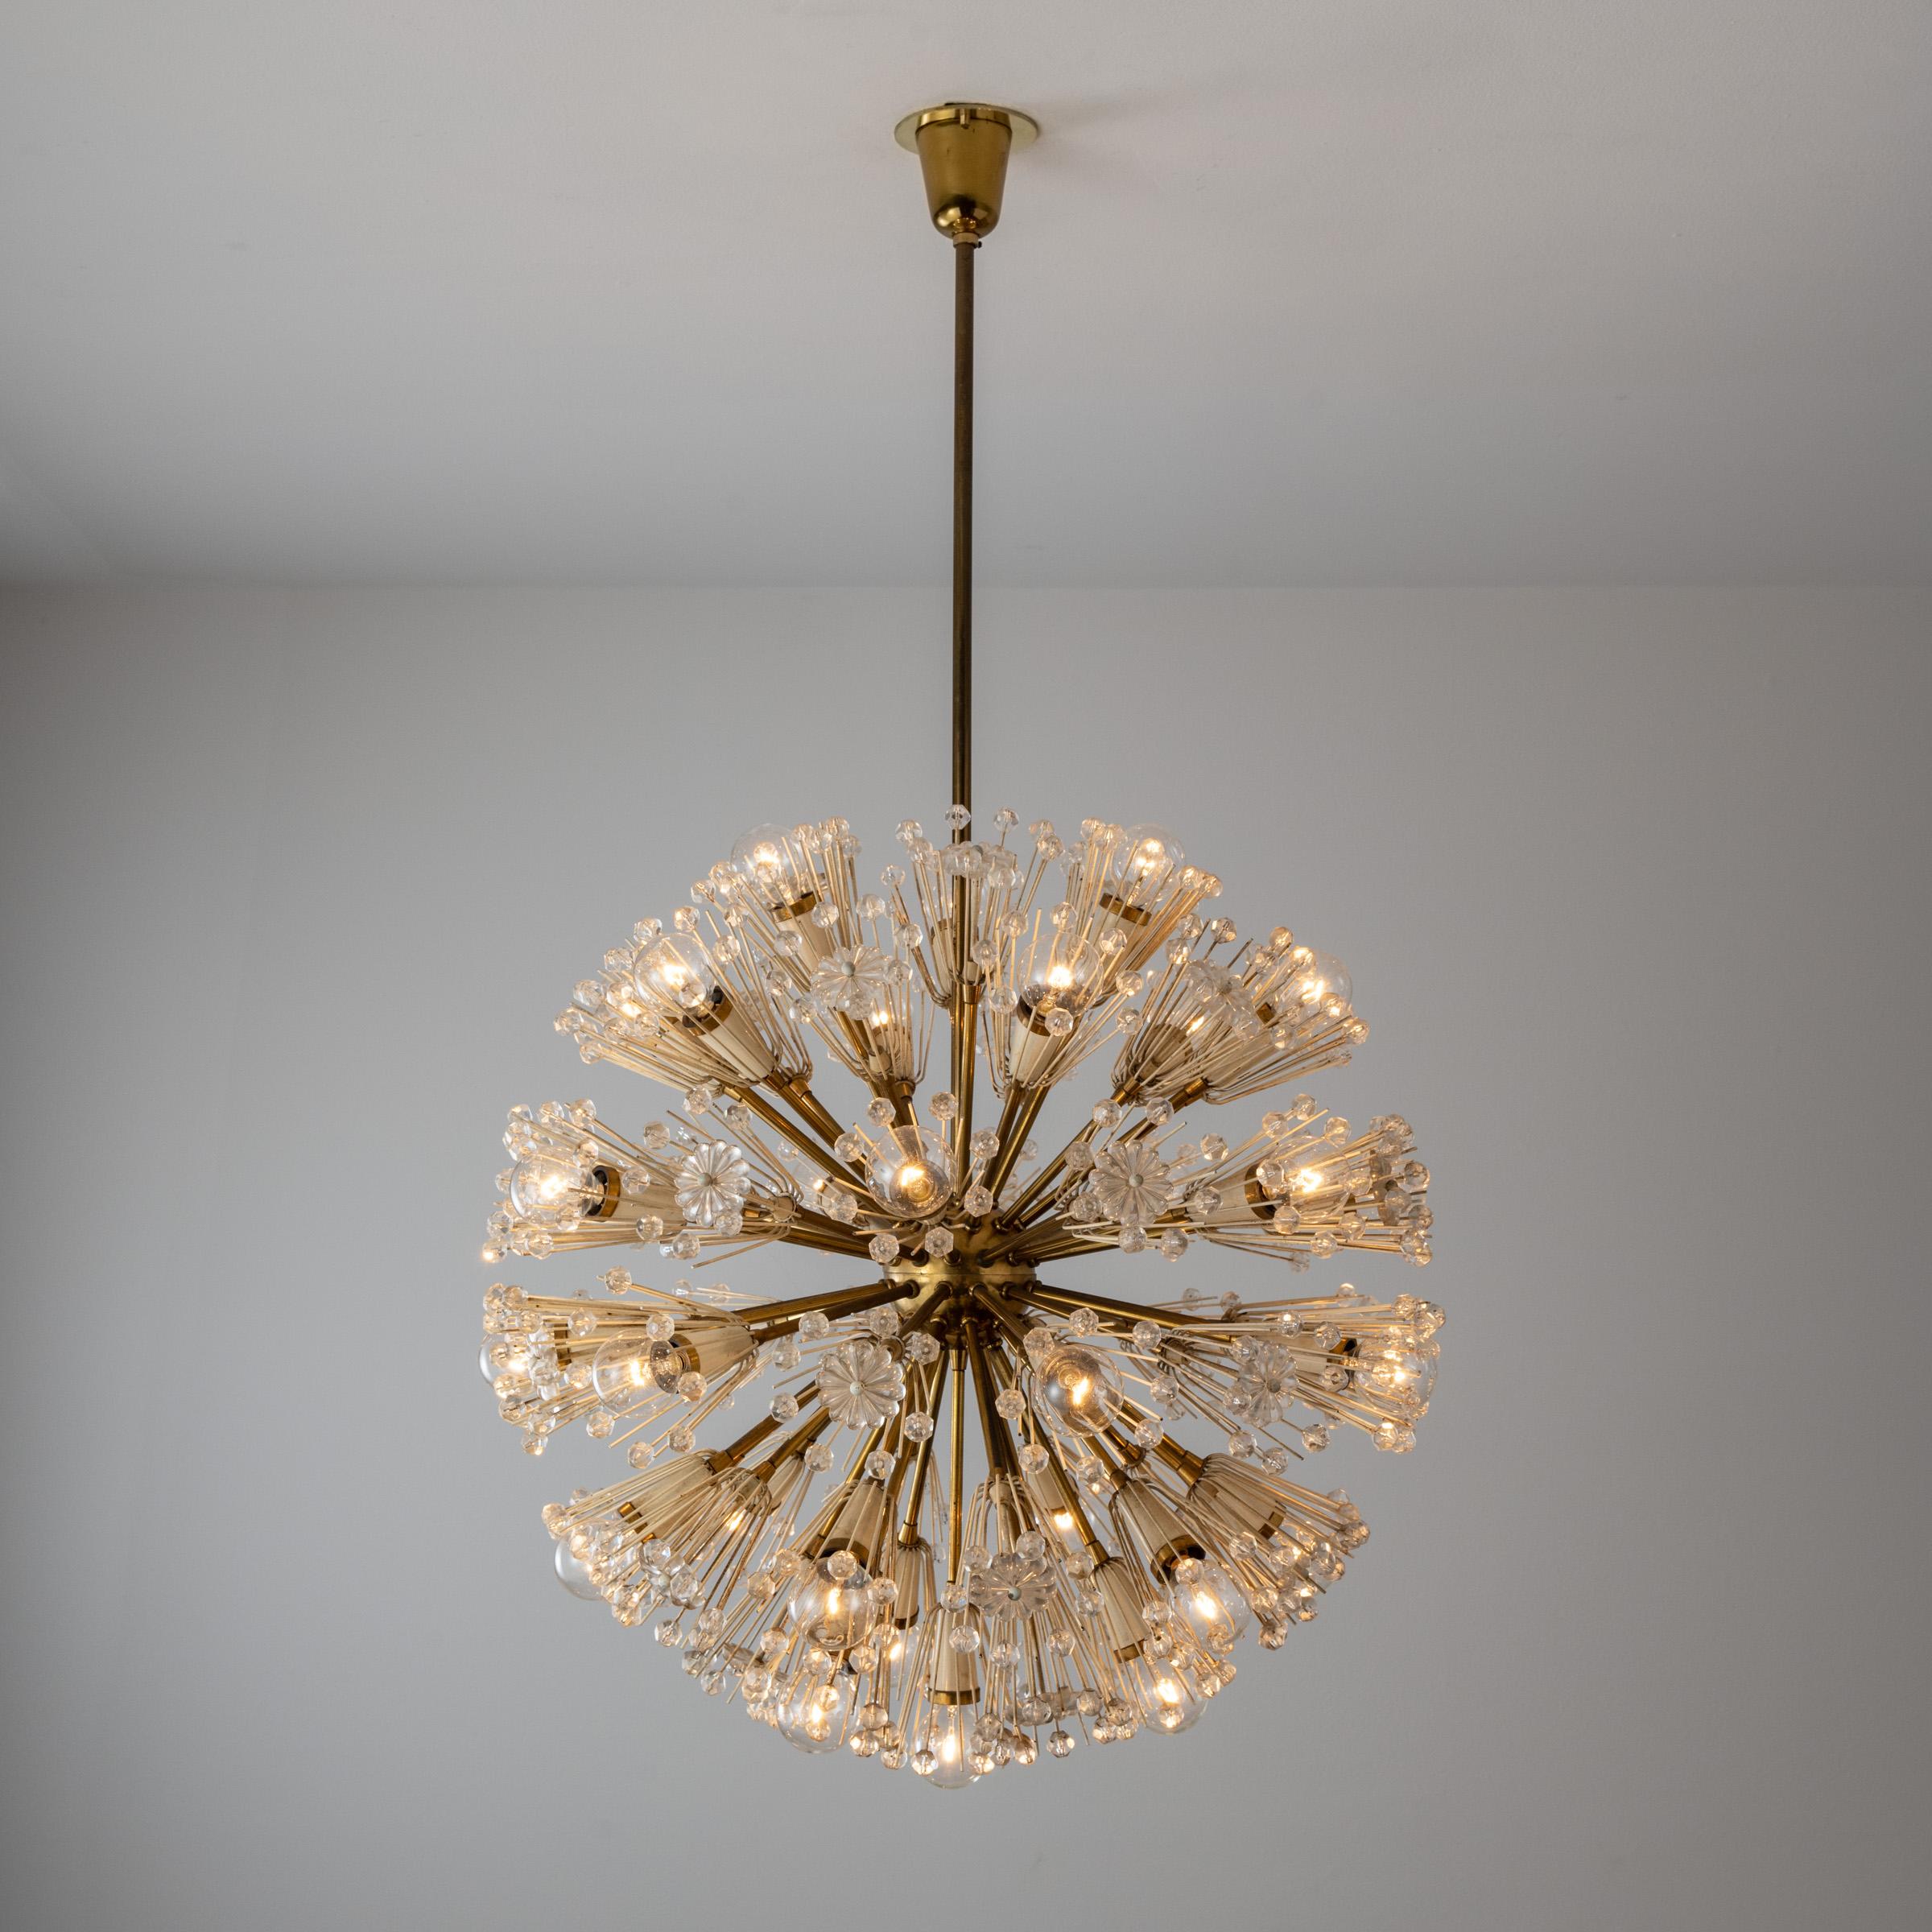 Large Snowball Pendant by Emil Stejnar for Rupert Nikoll. Designed and manufactured in Austria, circa 1960's. Brass, glass. Rewired for U.S. standards. Original canopy, custom backplate. We recommend 14 E14 25w maximum bulbs. Bulbs not included.